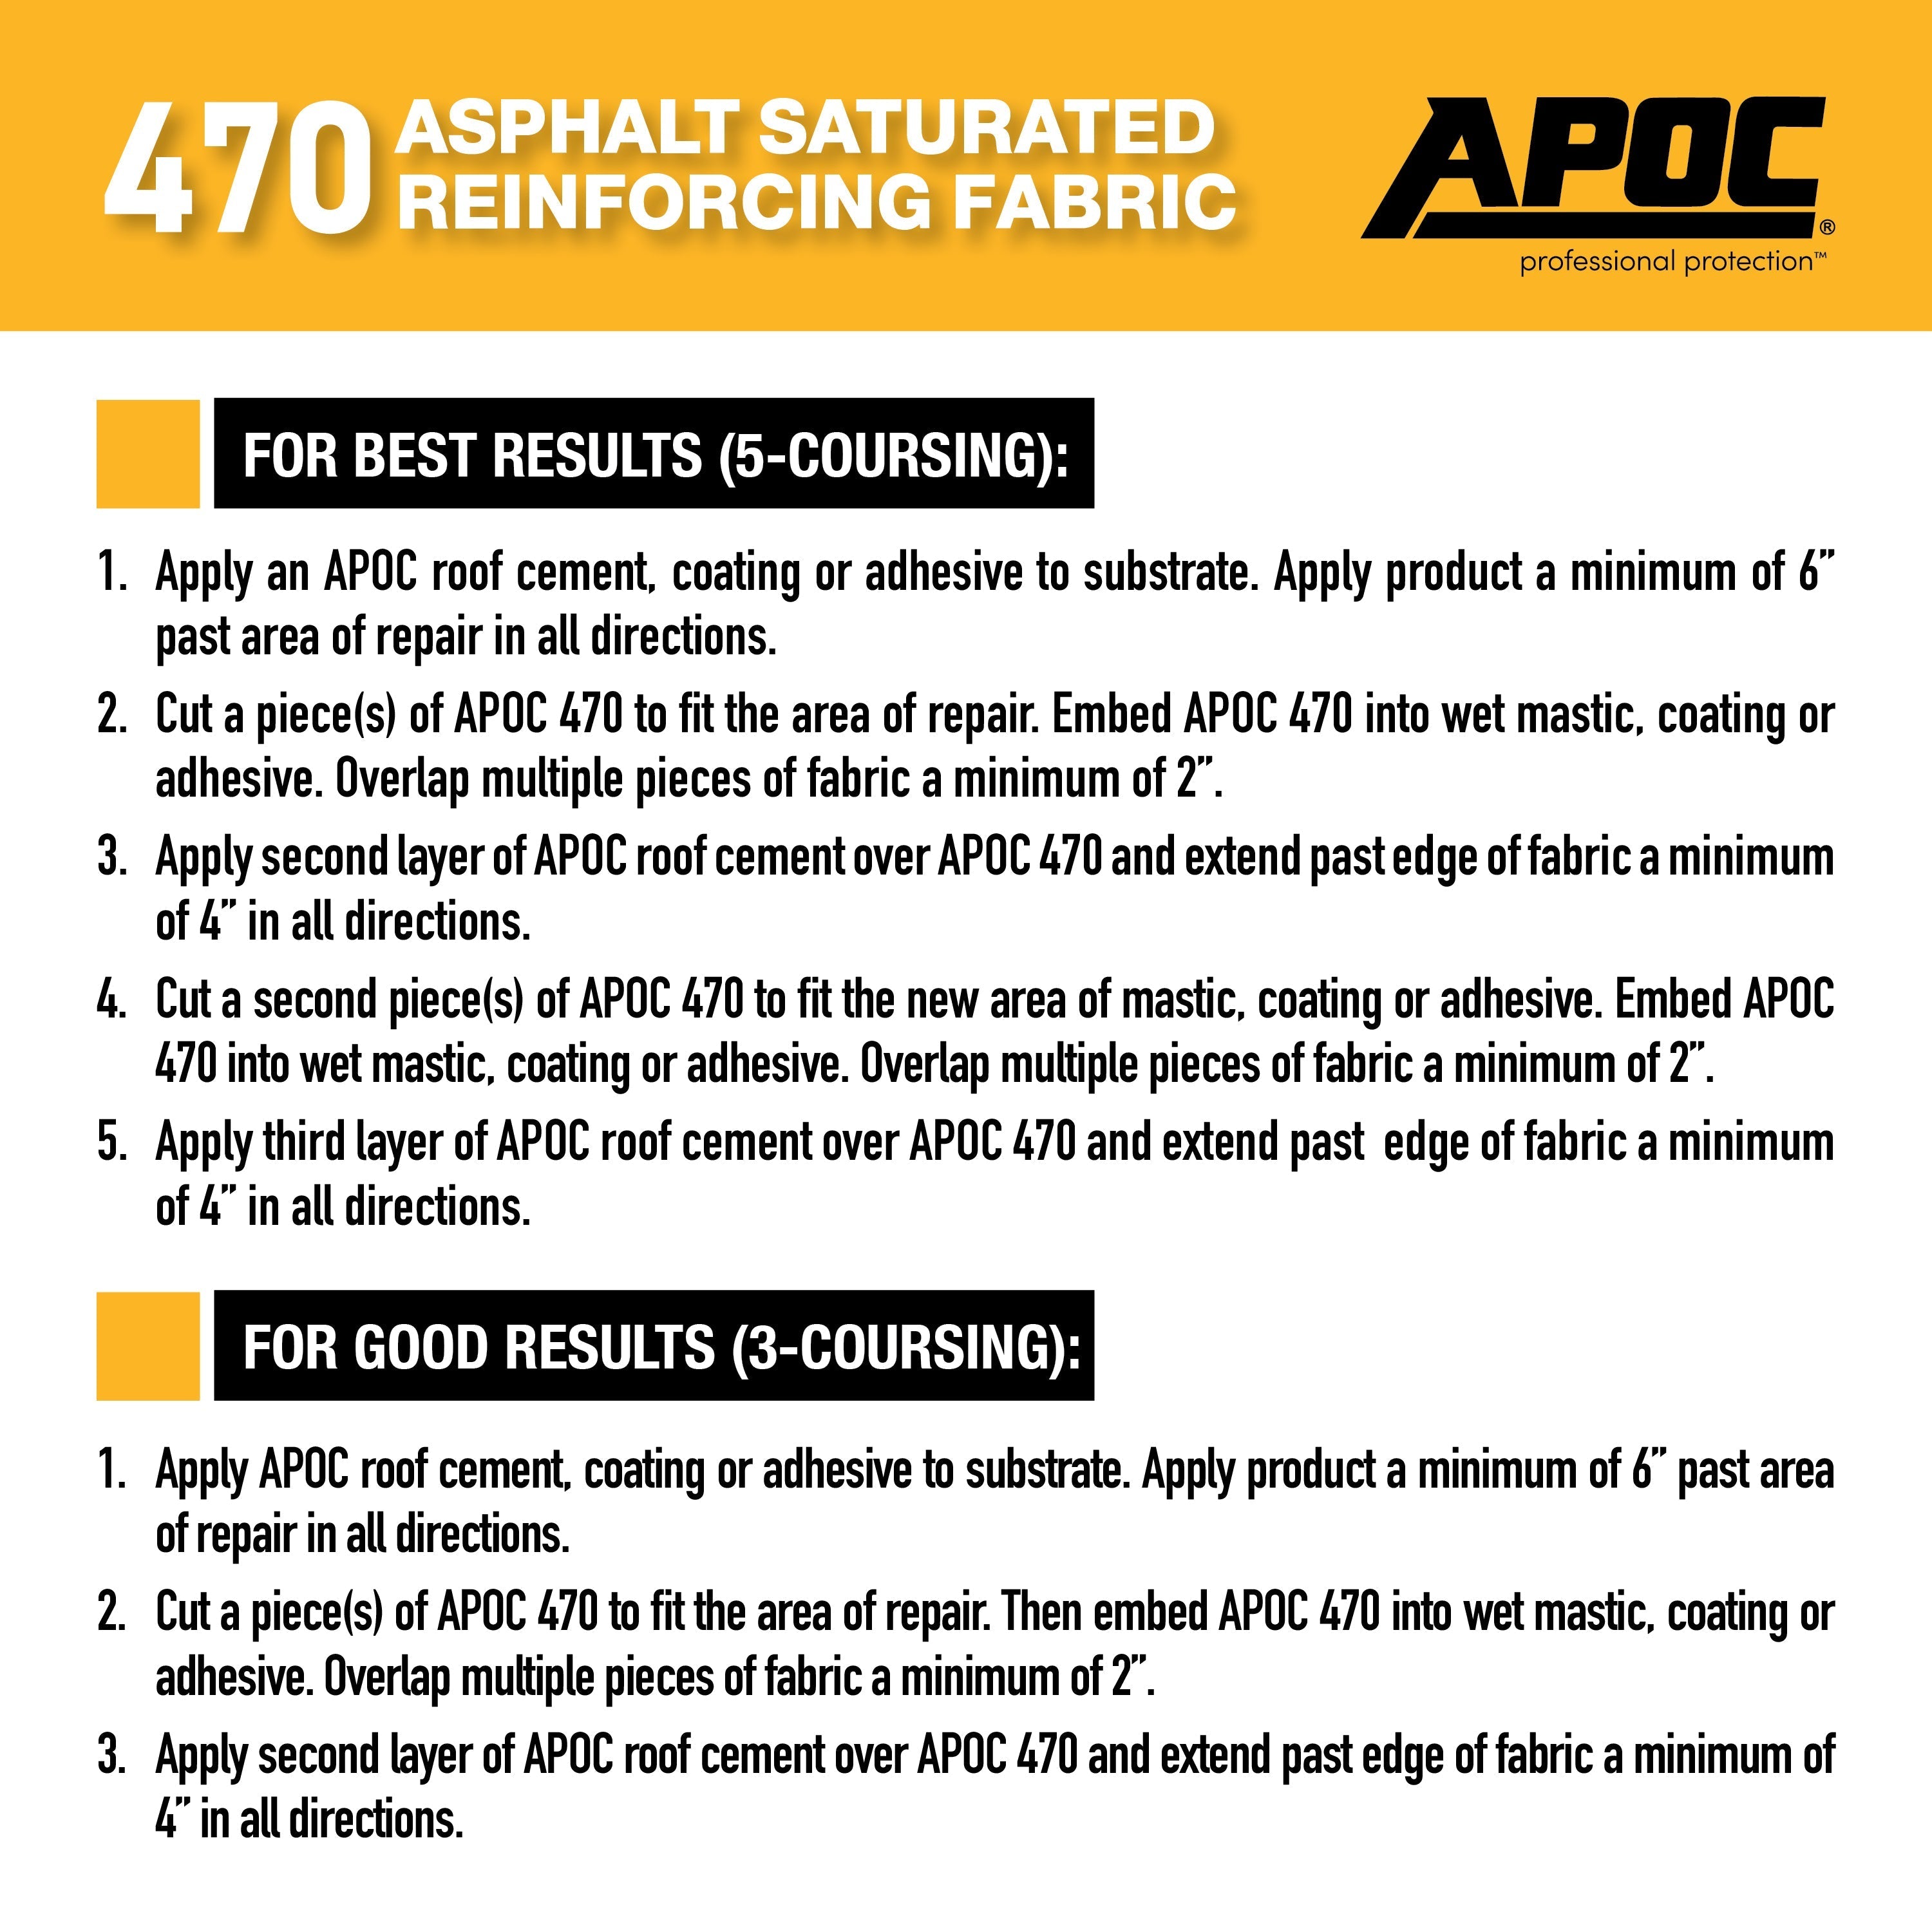 APOC® 470Asphalt Saturated Reinforcing Fabric